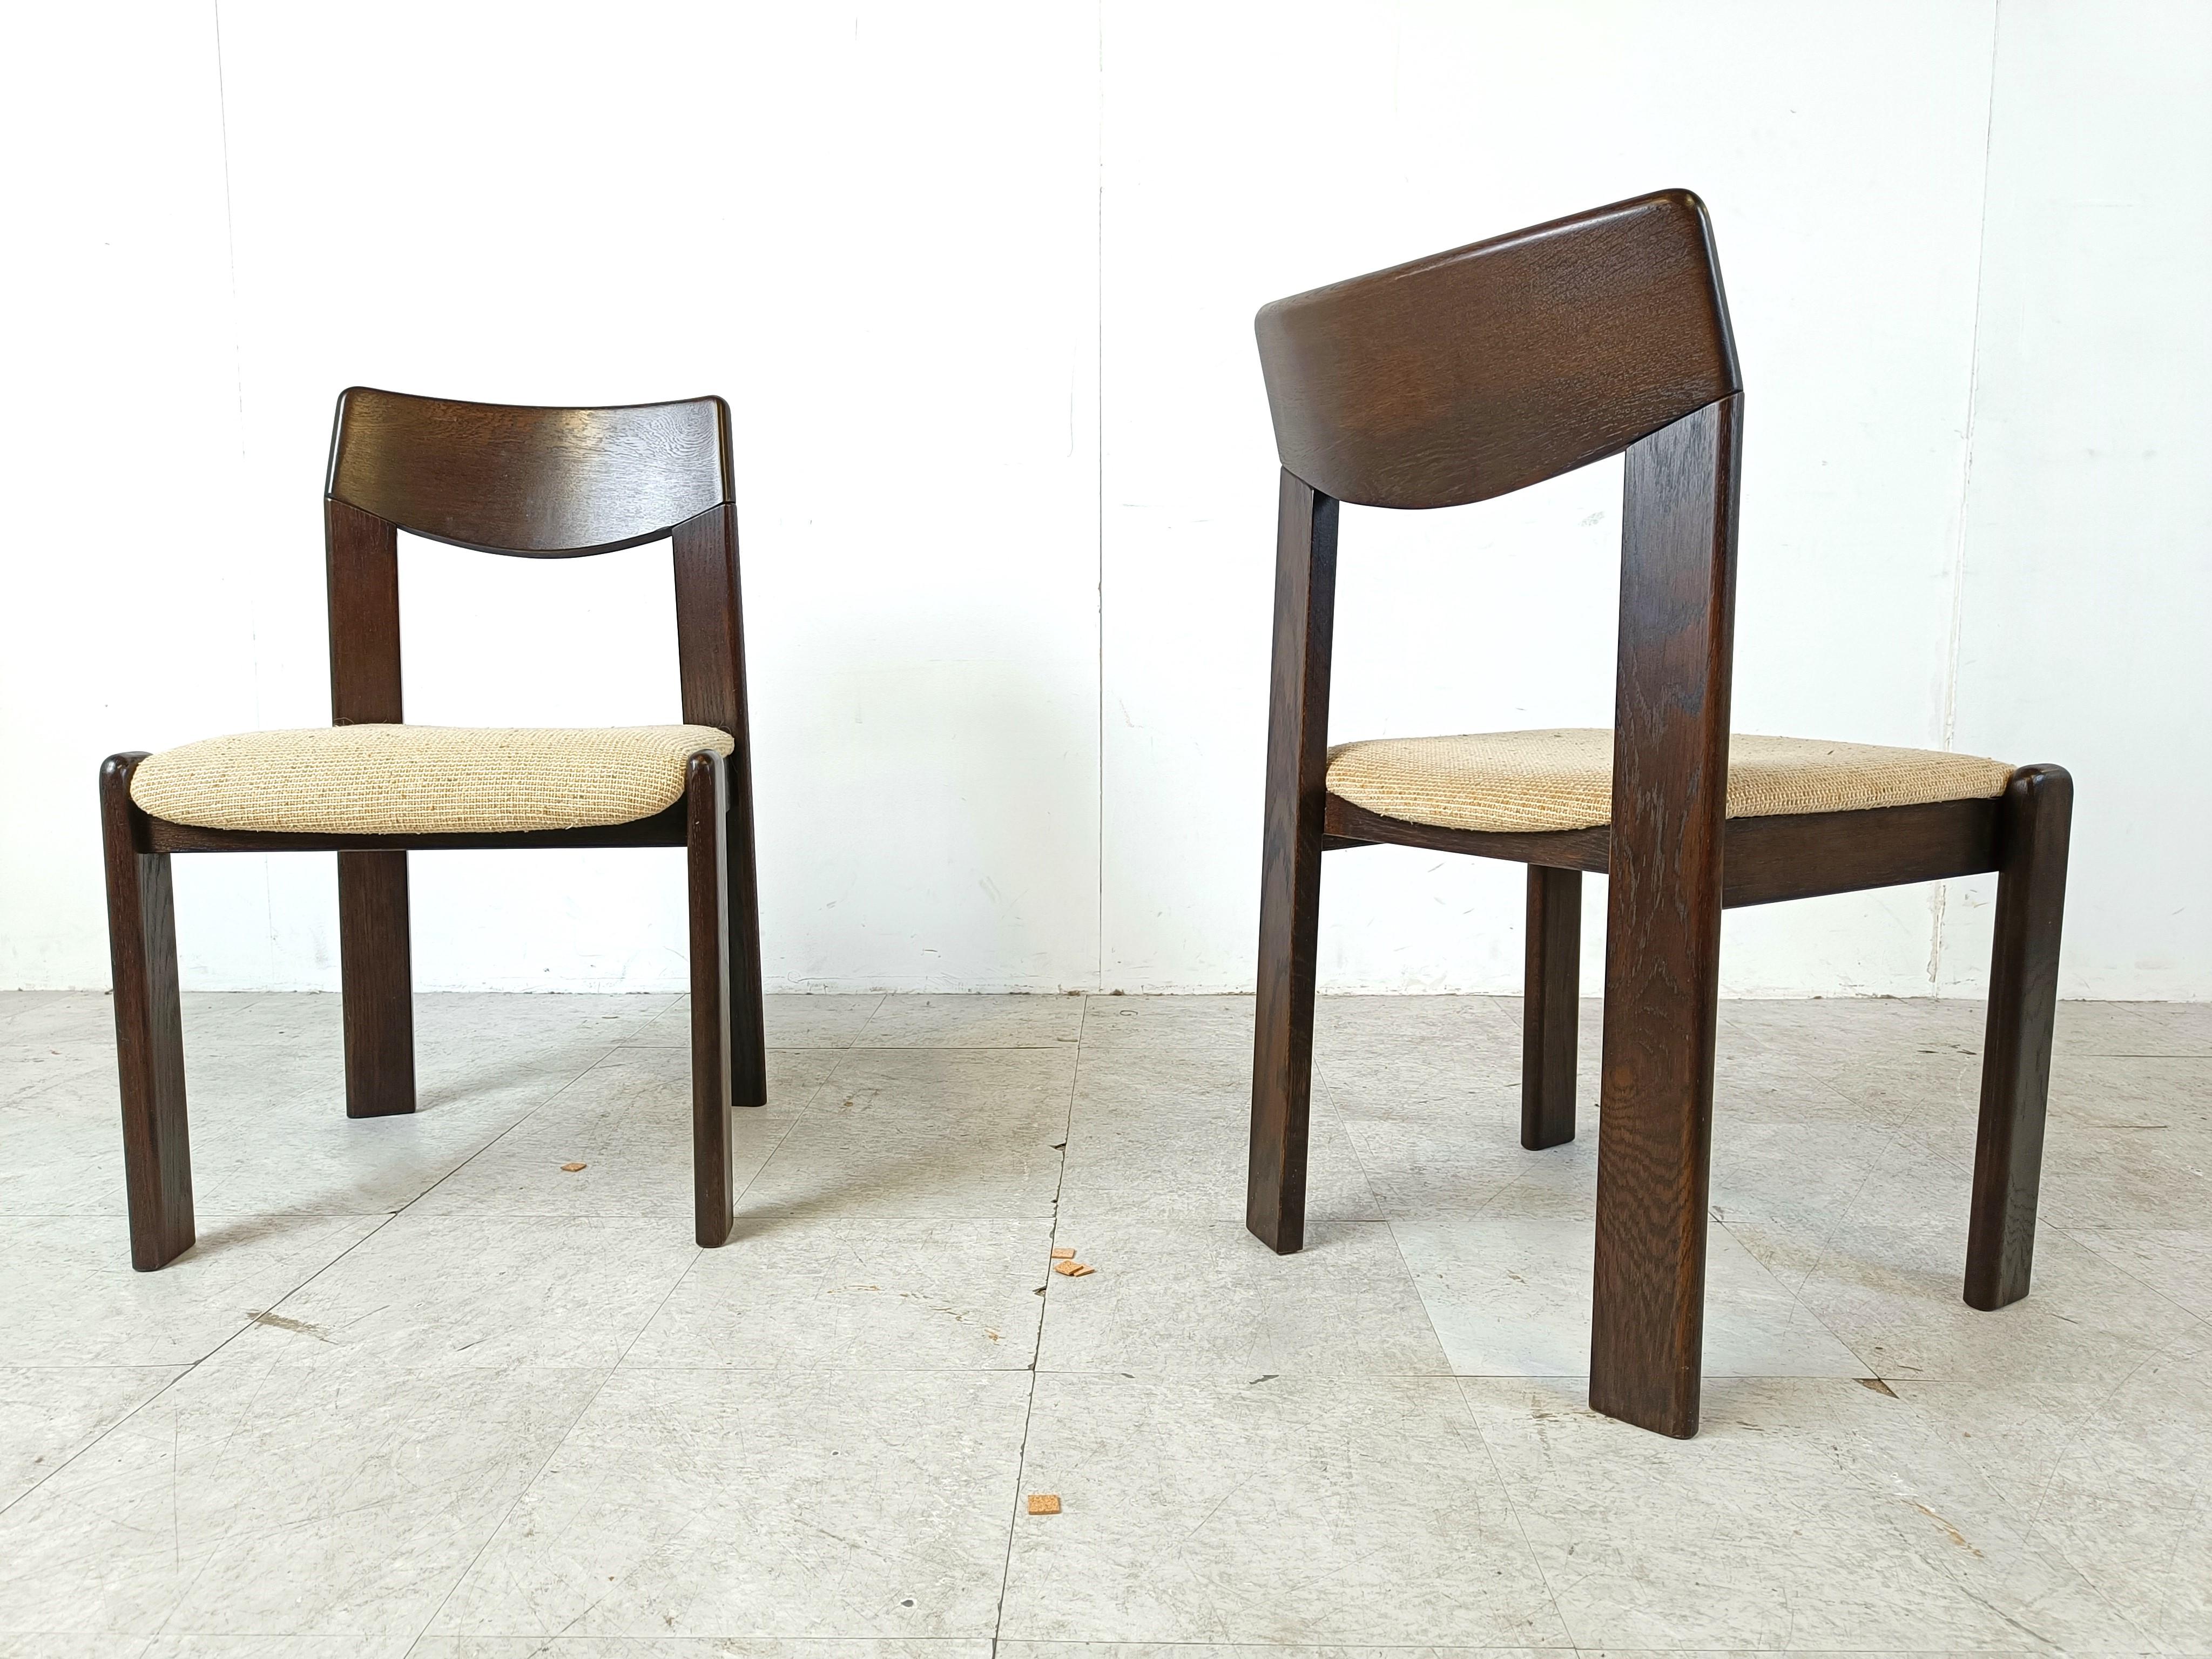 Vintage brutalist dining chairs, set of 6 - 1970s For Sale 2